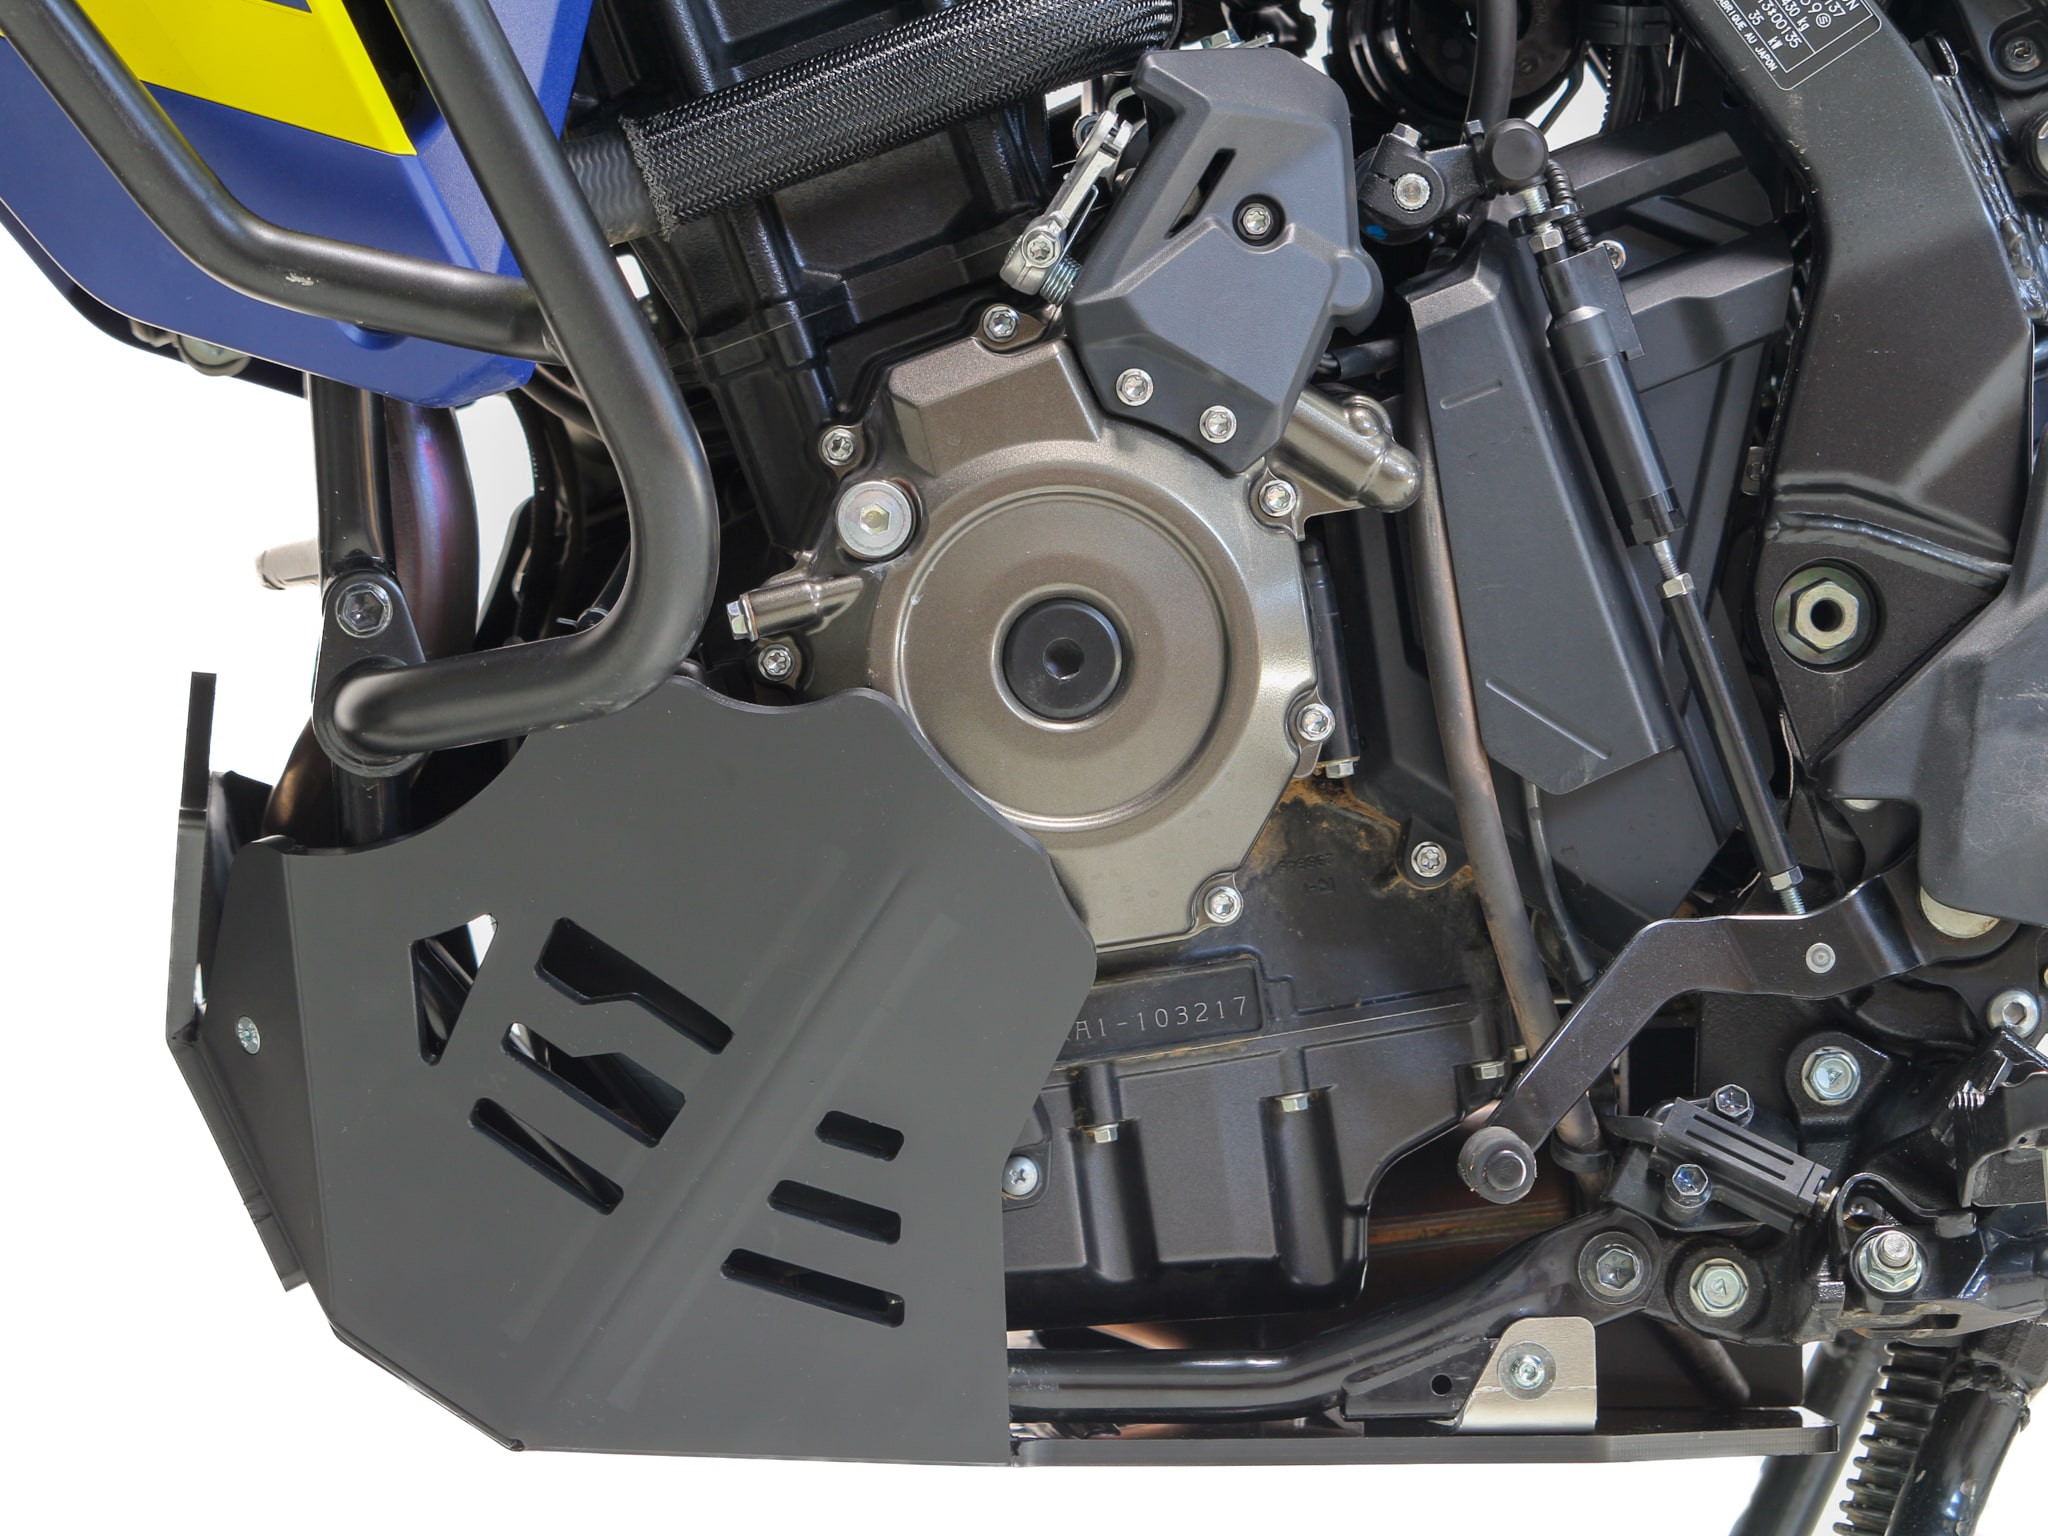 Left side of a black HDPE skid plate mounted on a Suzuki V-strom 800DE